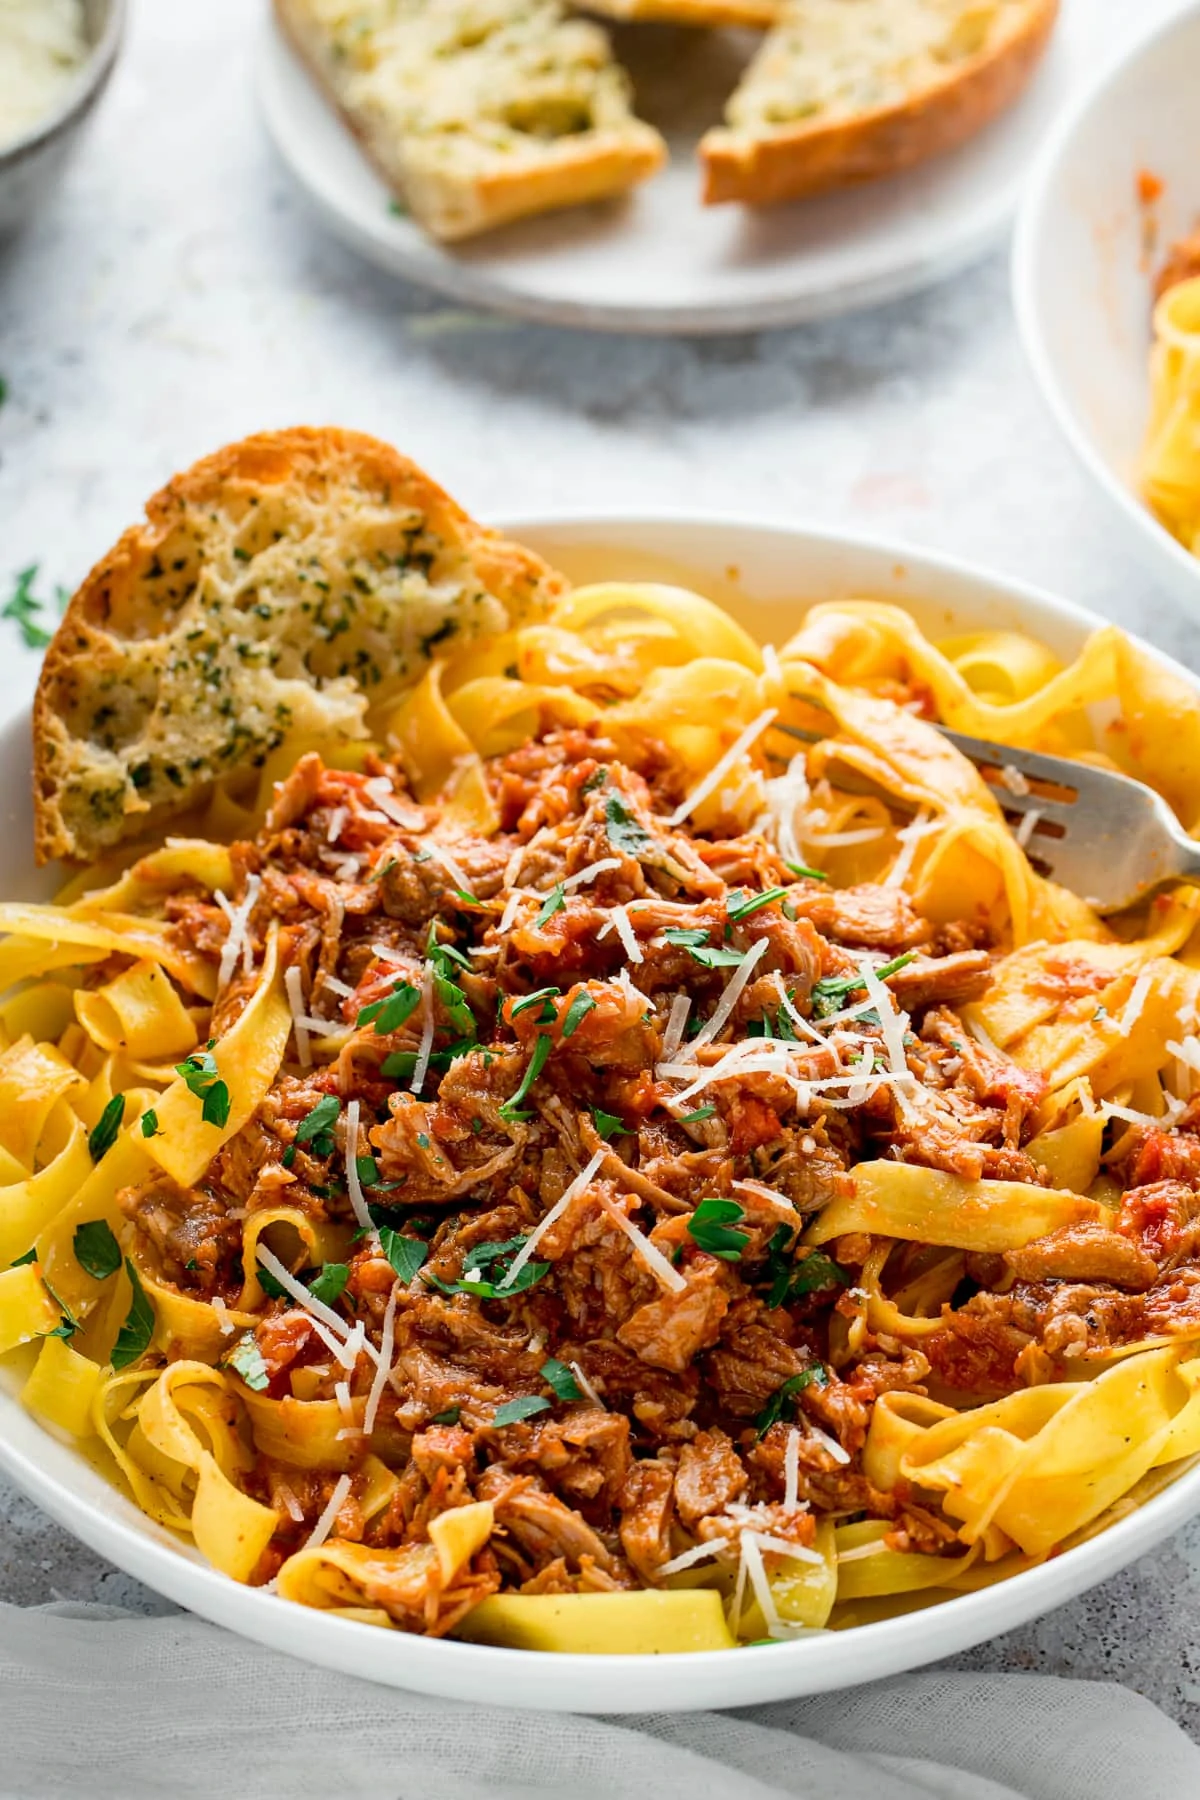 slow cooked pork ragu on top of tagliatelle in a white bowl with garlic bread